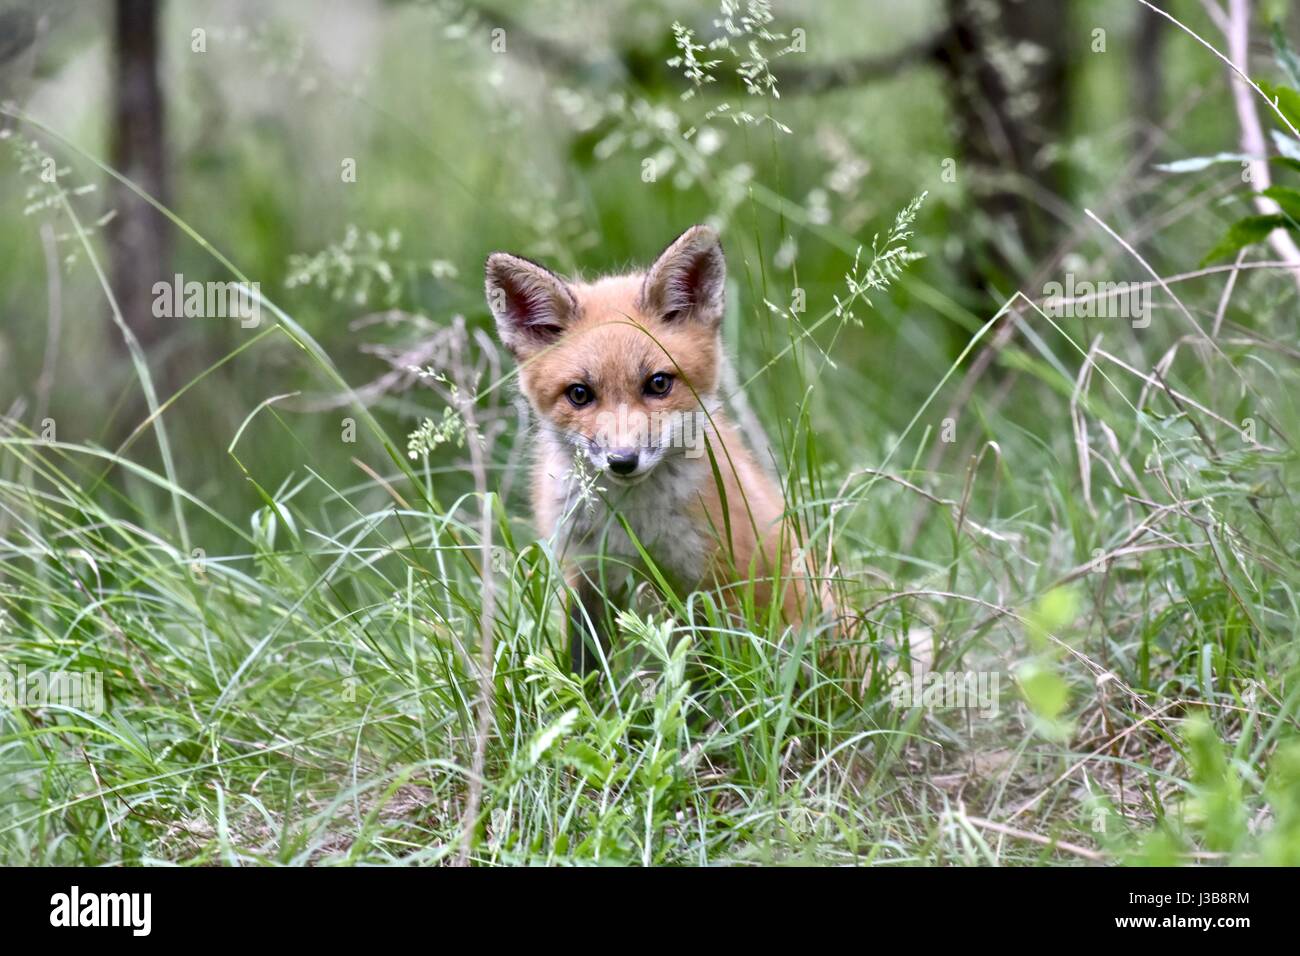 Maryland, USA - May 05, 2017: Baby red fox (Vulpes vulpes) emerging from a fox den to play after the rain subsided on a stormy spring day. Photo Credit: Jeramey Lende/Alamy Live News Stock Photo